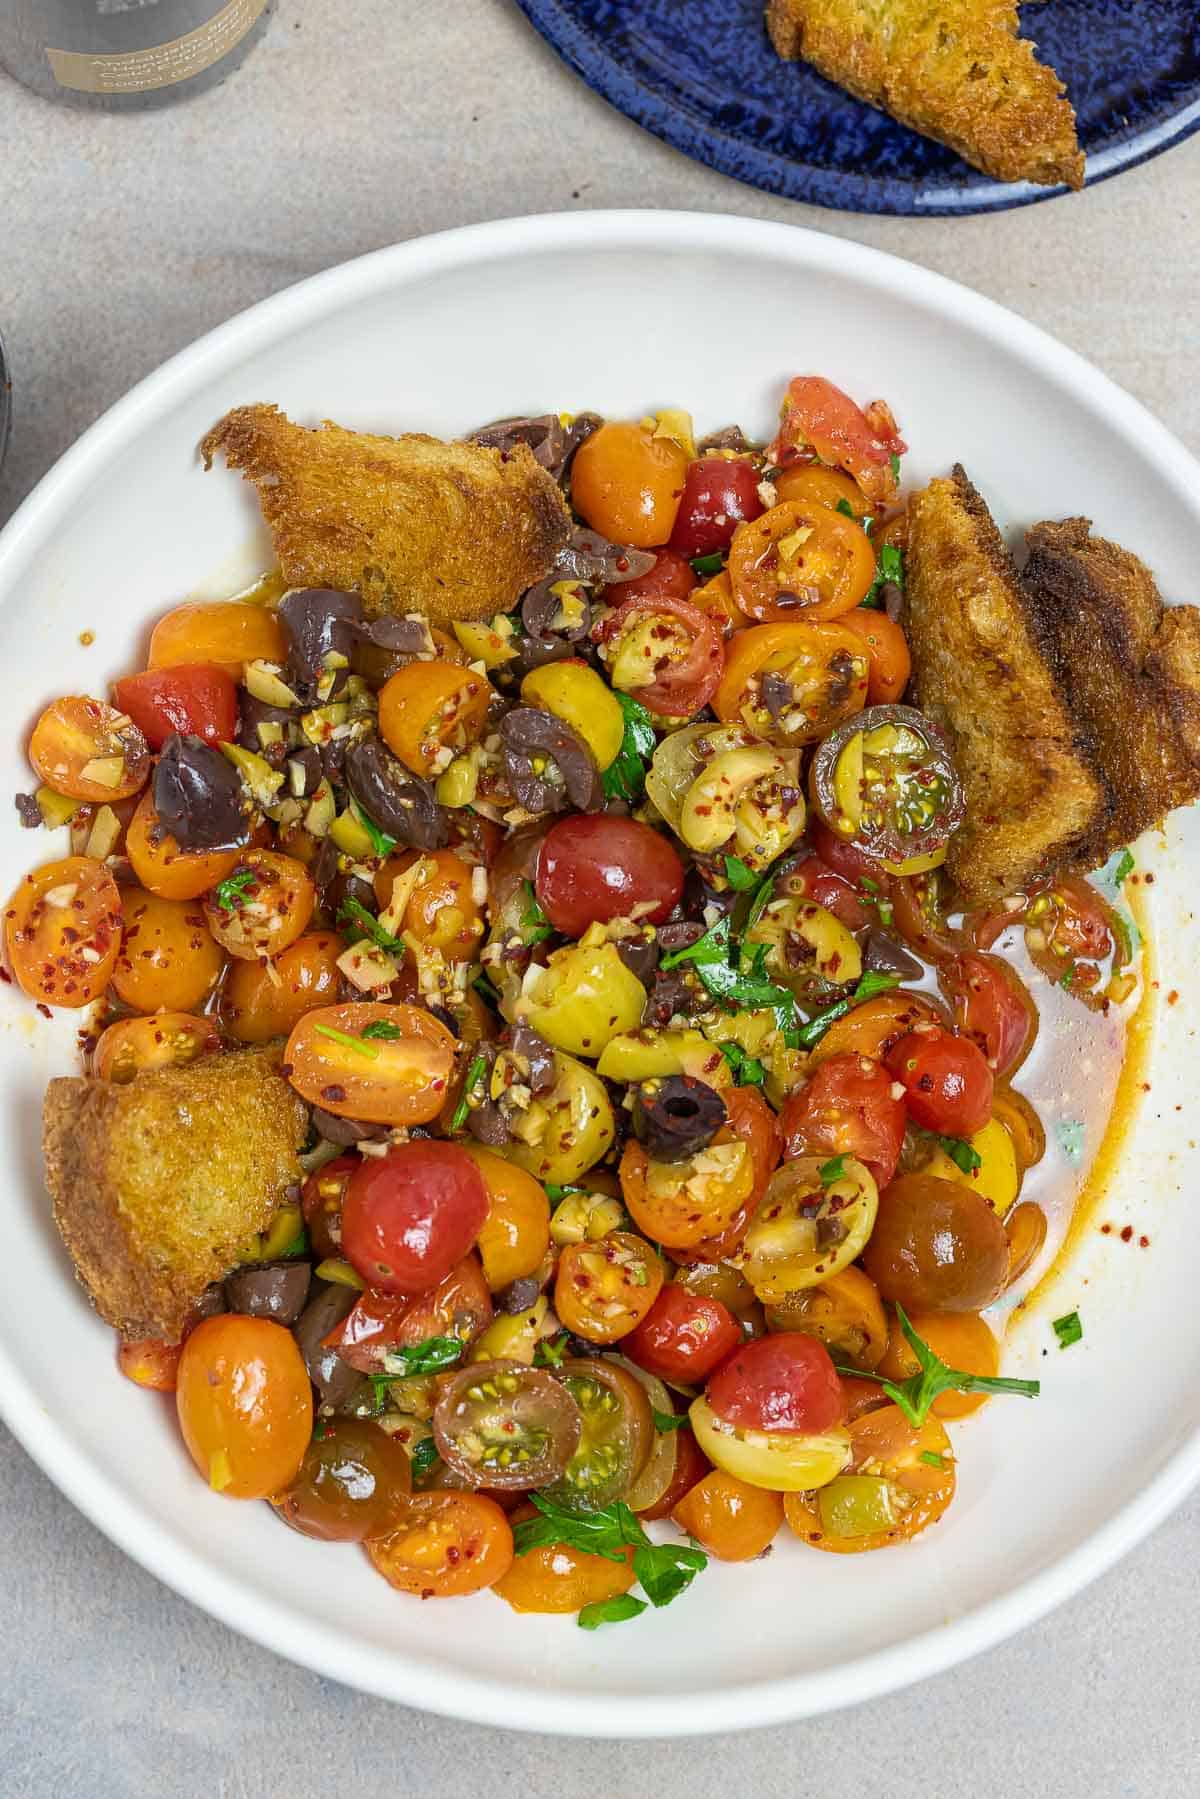 simple cherry tomato salad on a plate with fried sourdough.